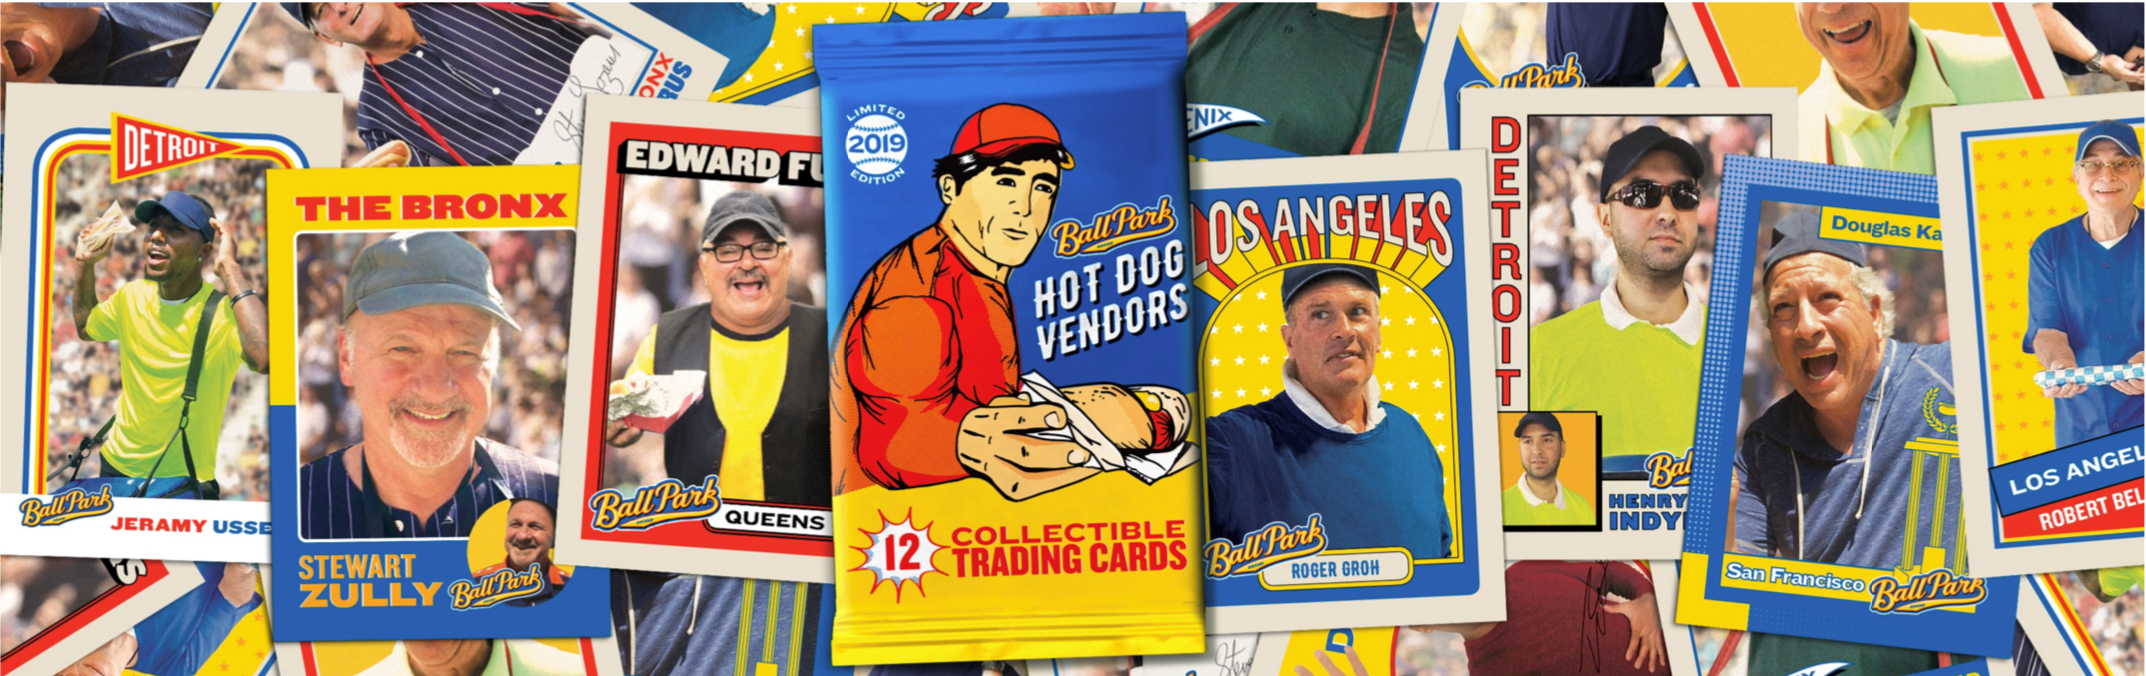 Ball Park trading cards